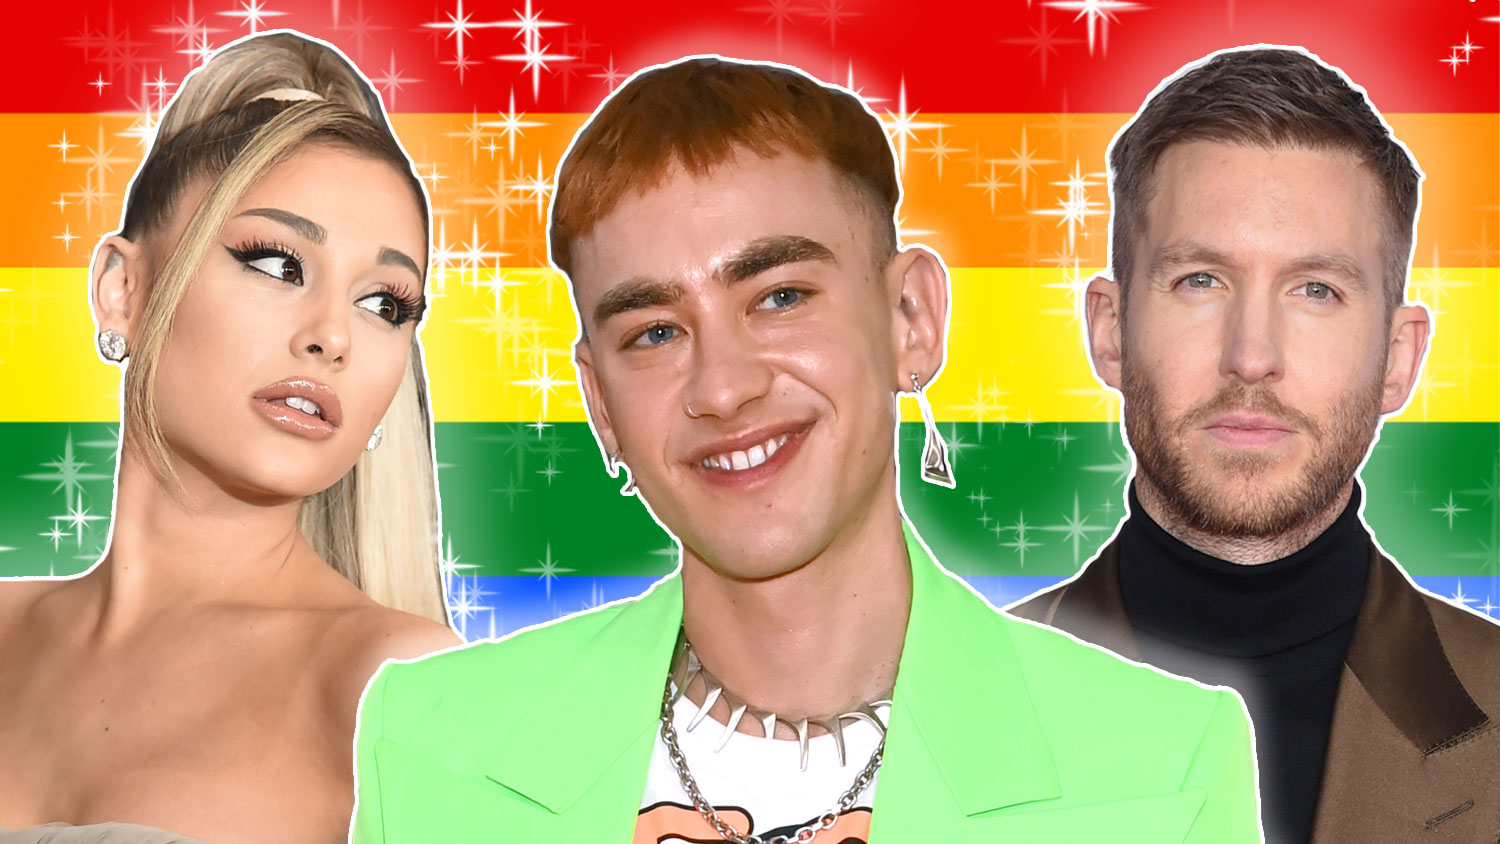 Ariana Grande Nude Lesbian - Songs that champion the LGBTQ+ community from Taylor Swift and more